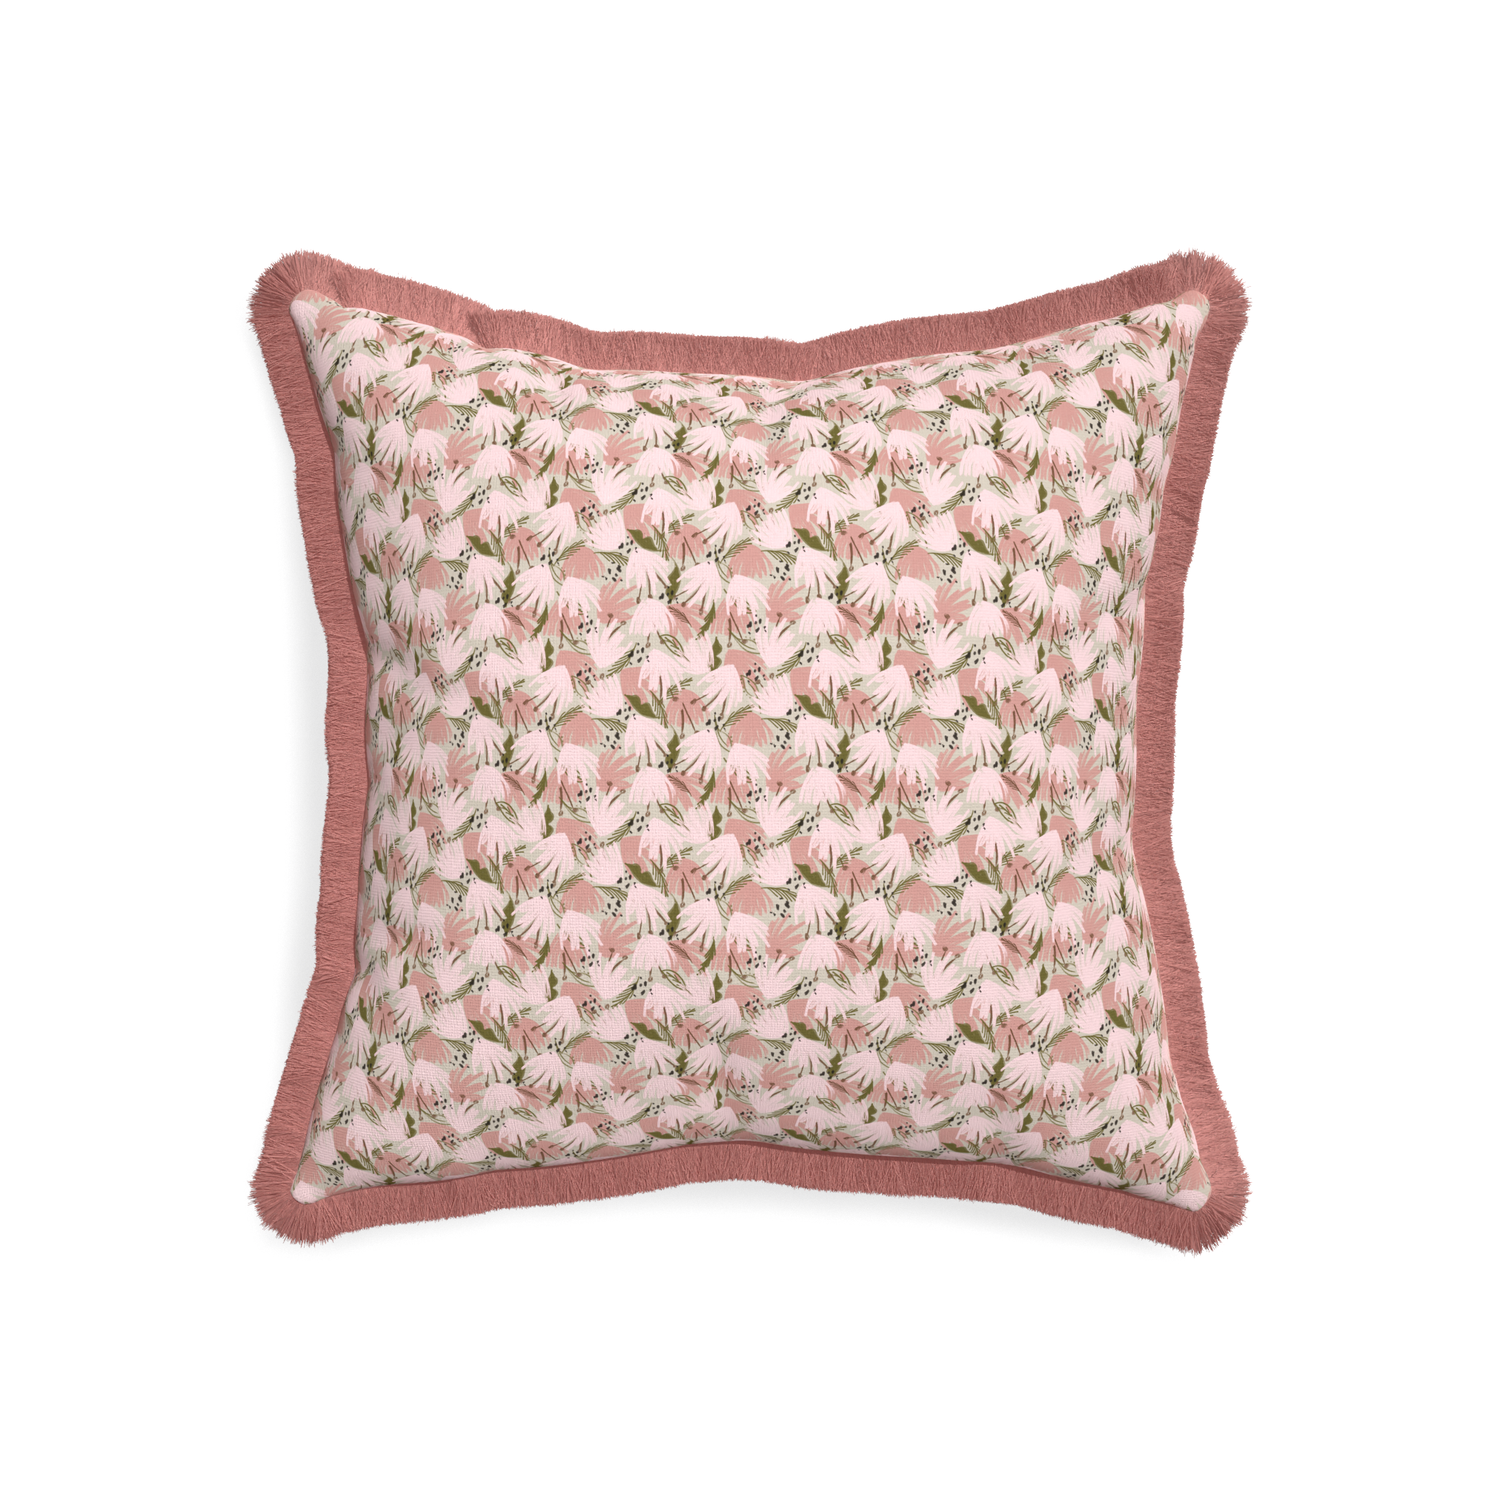 20-square eden pink custom pillow with d fringe on white background